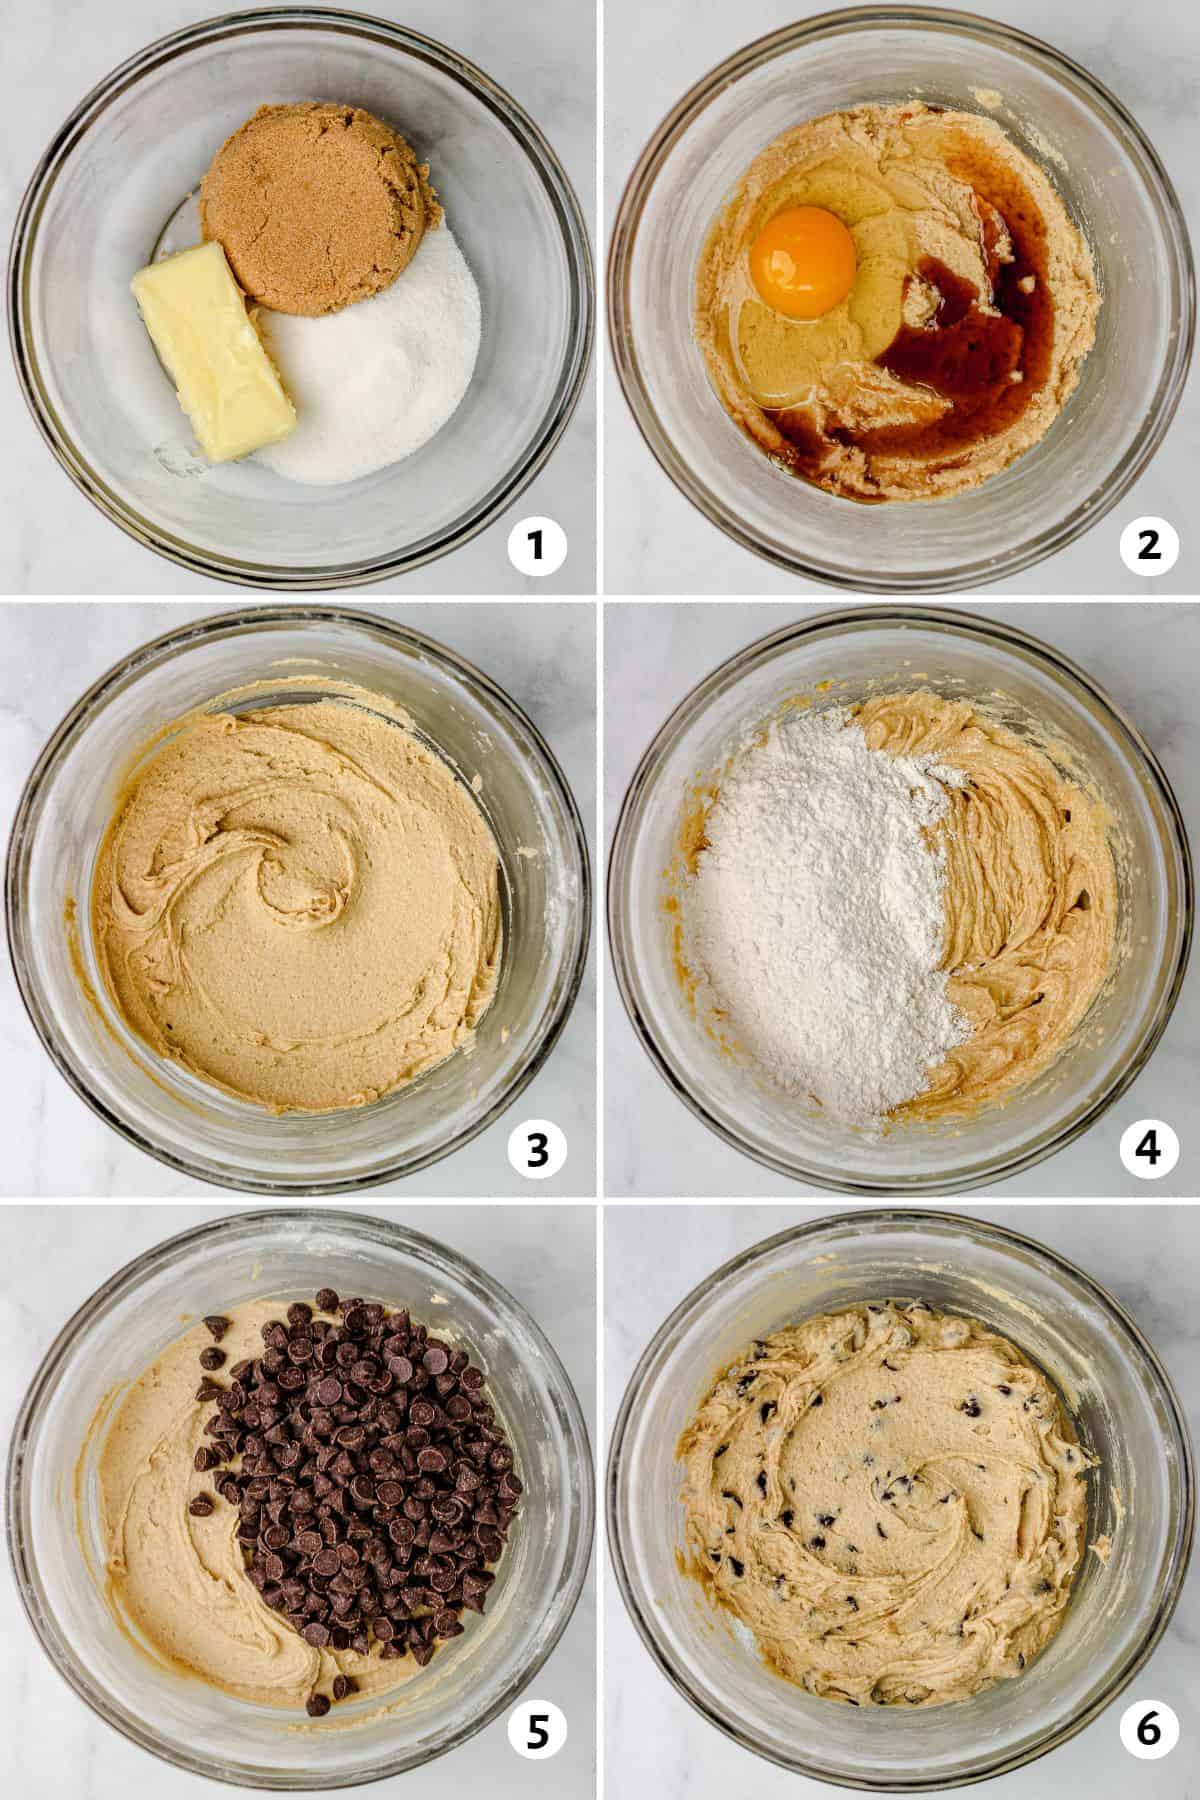 6 image collage making recipe: 1- butter and sugars in a bowl, 2- after creaming with an egg and vanilla added, 3- after mixing, 4- flour mixture added, 5- chocolate chips added to dough, 6- cookie dough after combined.